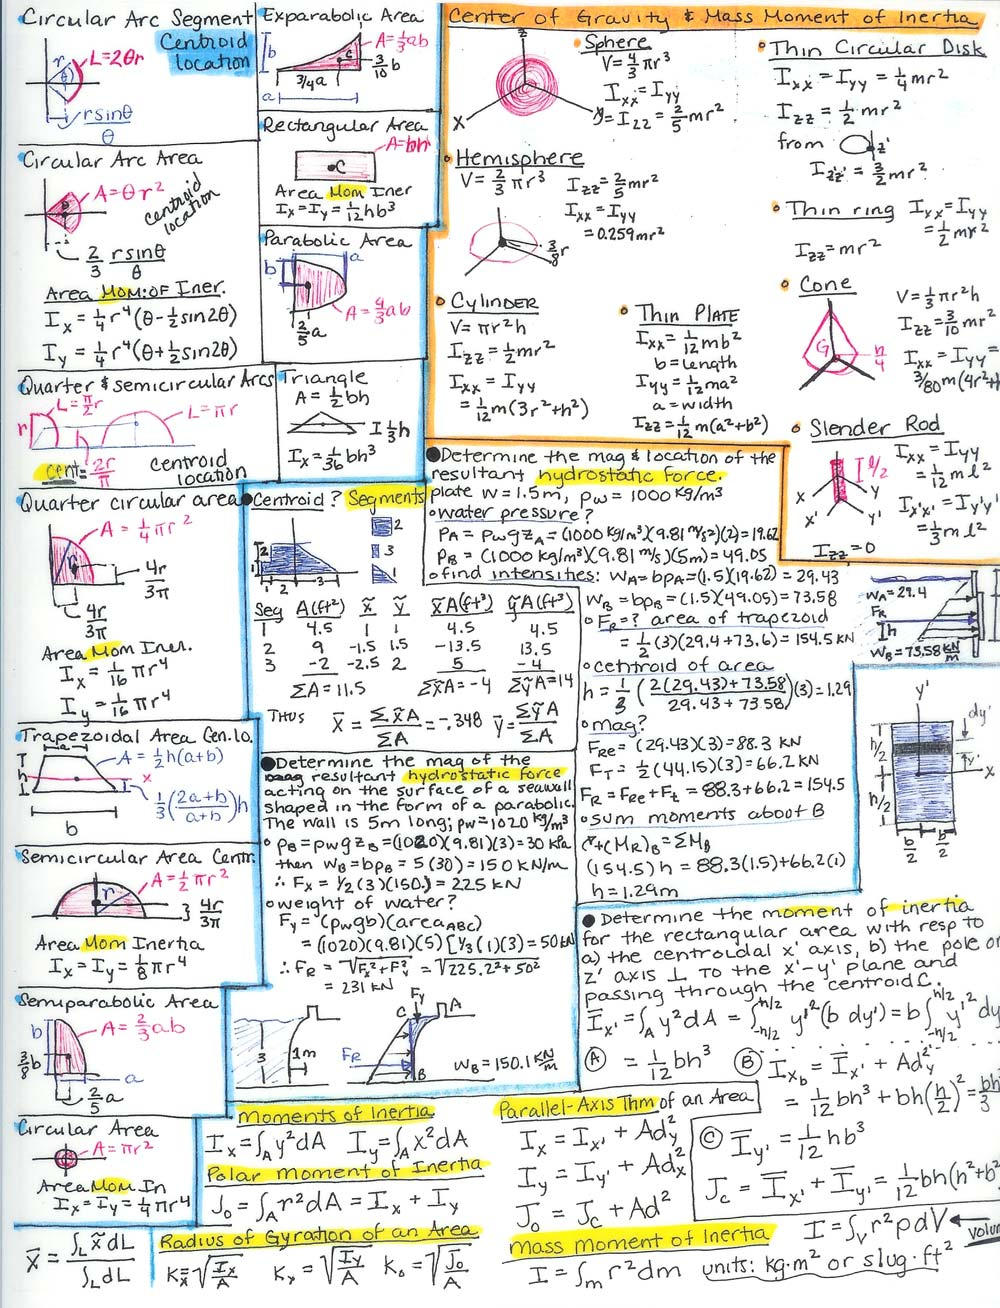 How to write a cheat sheet for exam